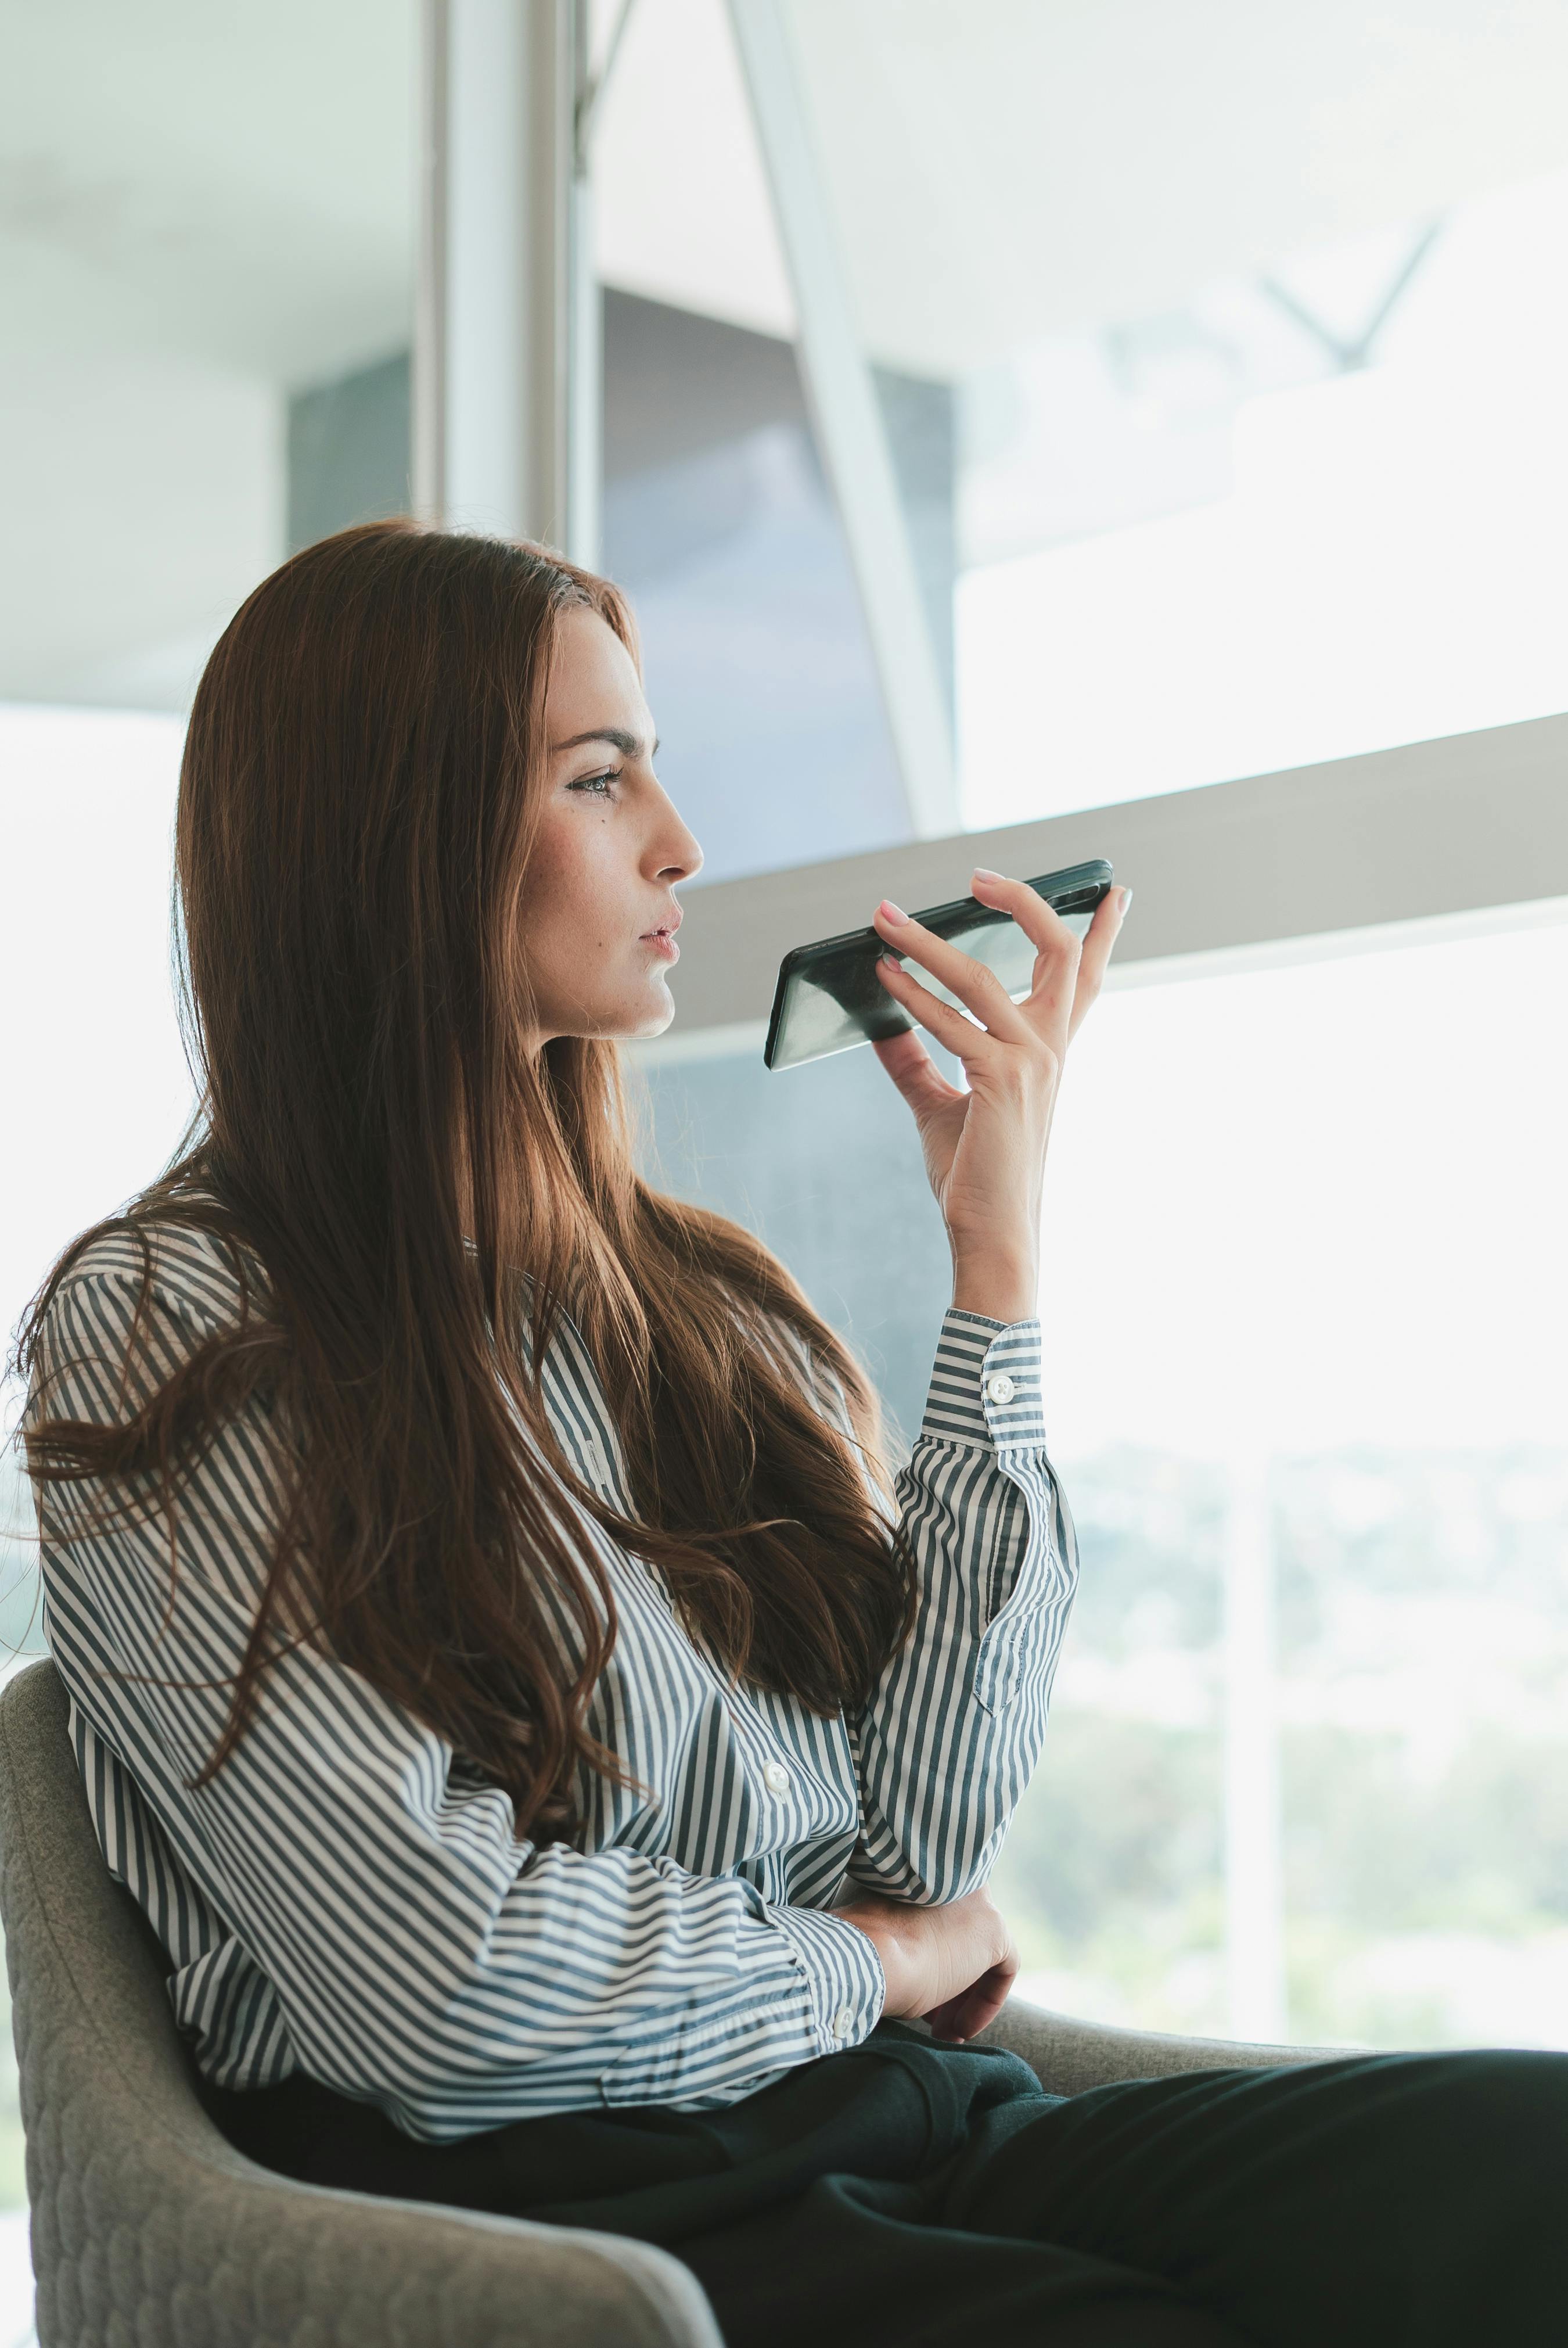 A businesswoman talking on phone | Source: Pexels